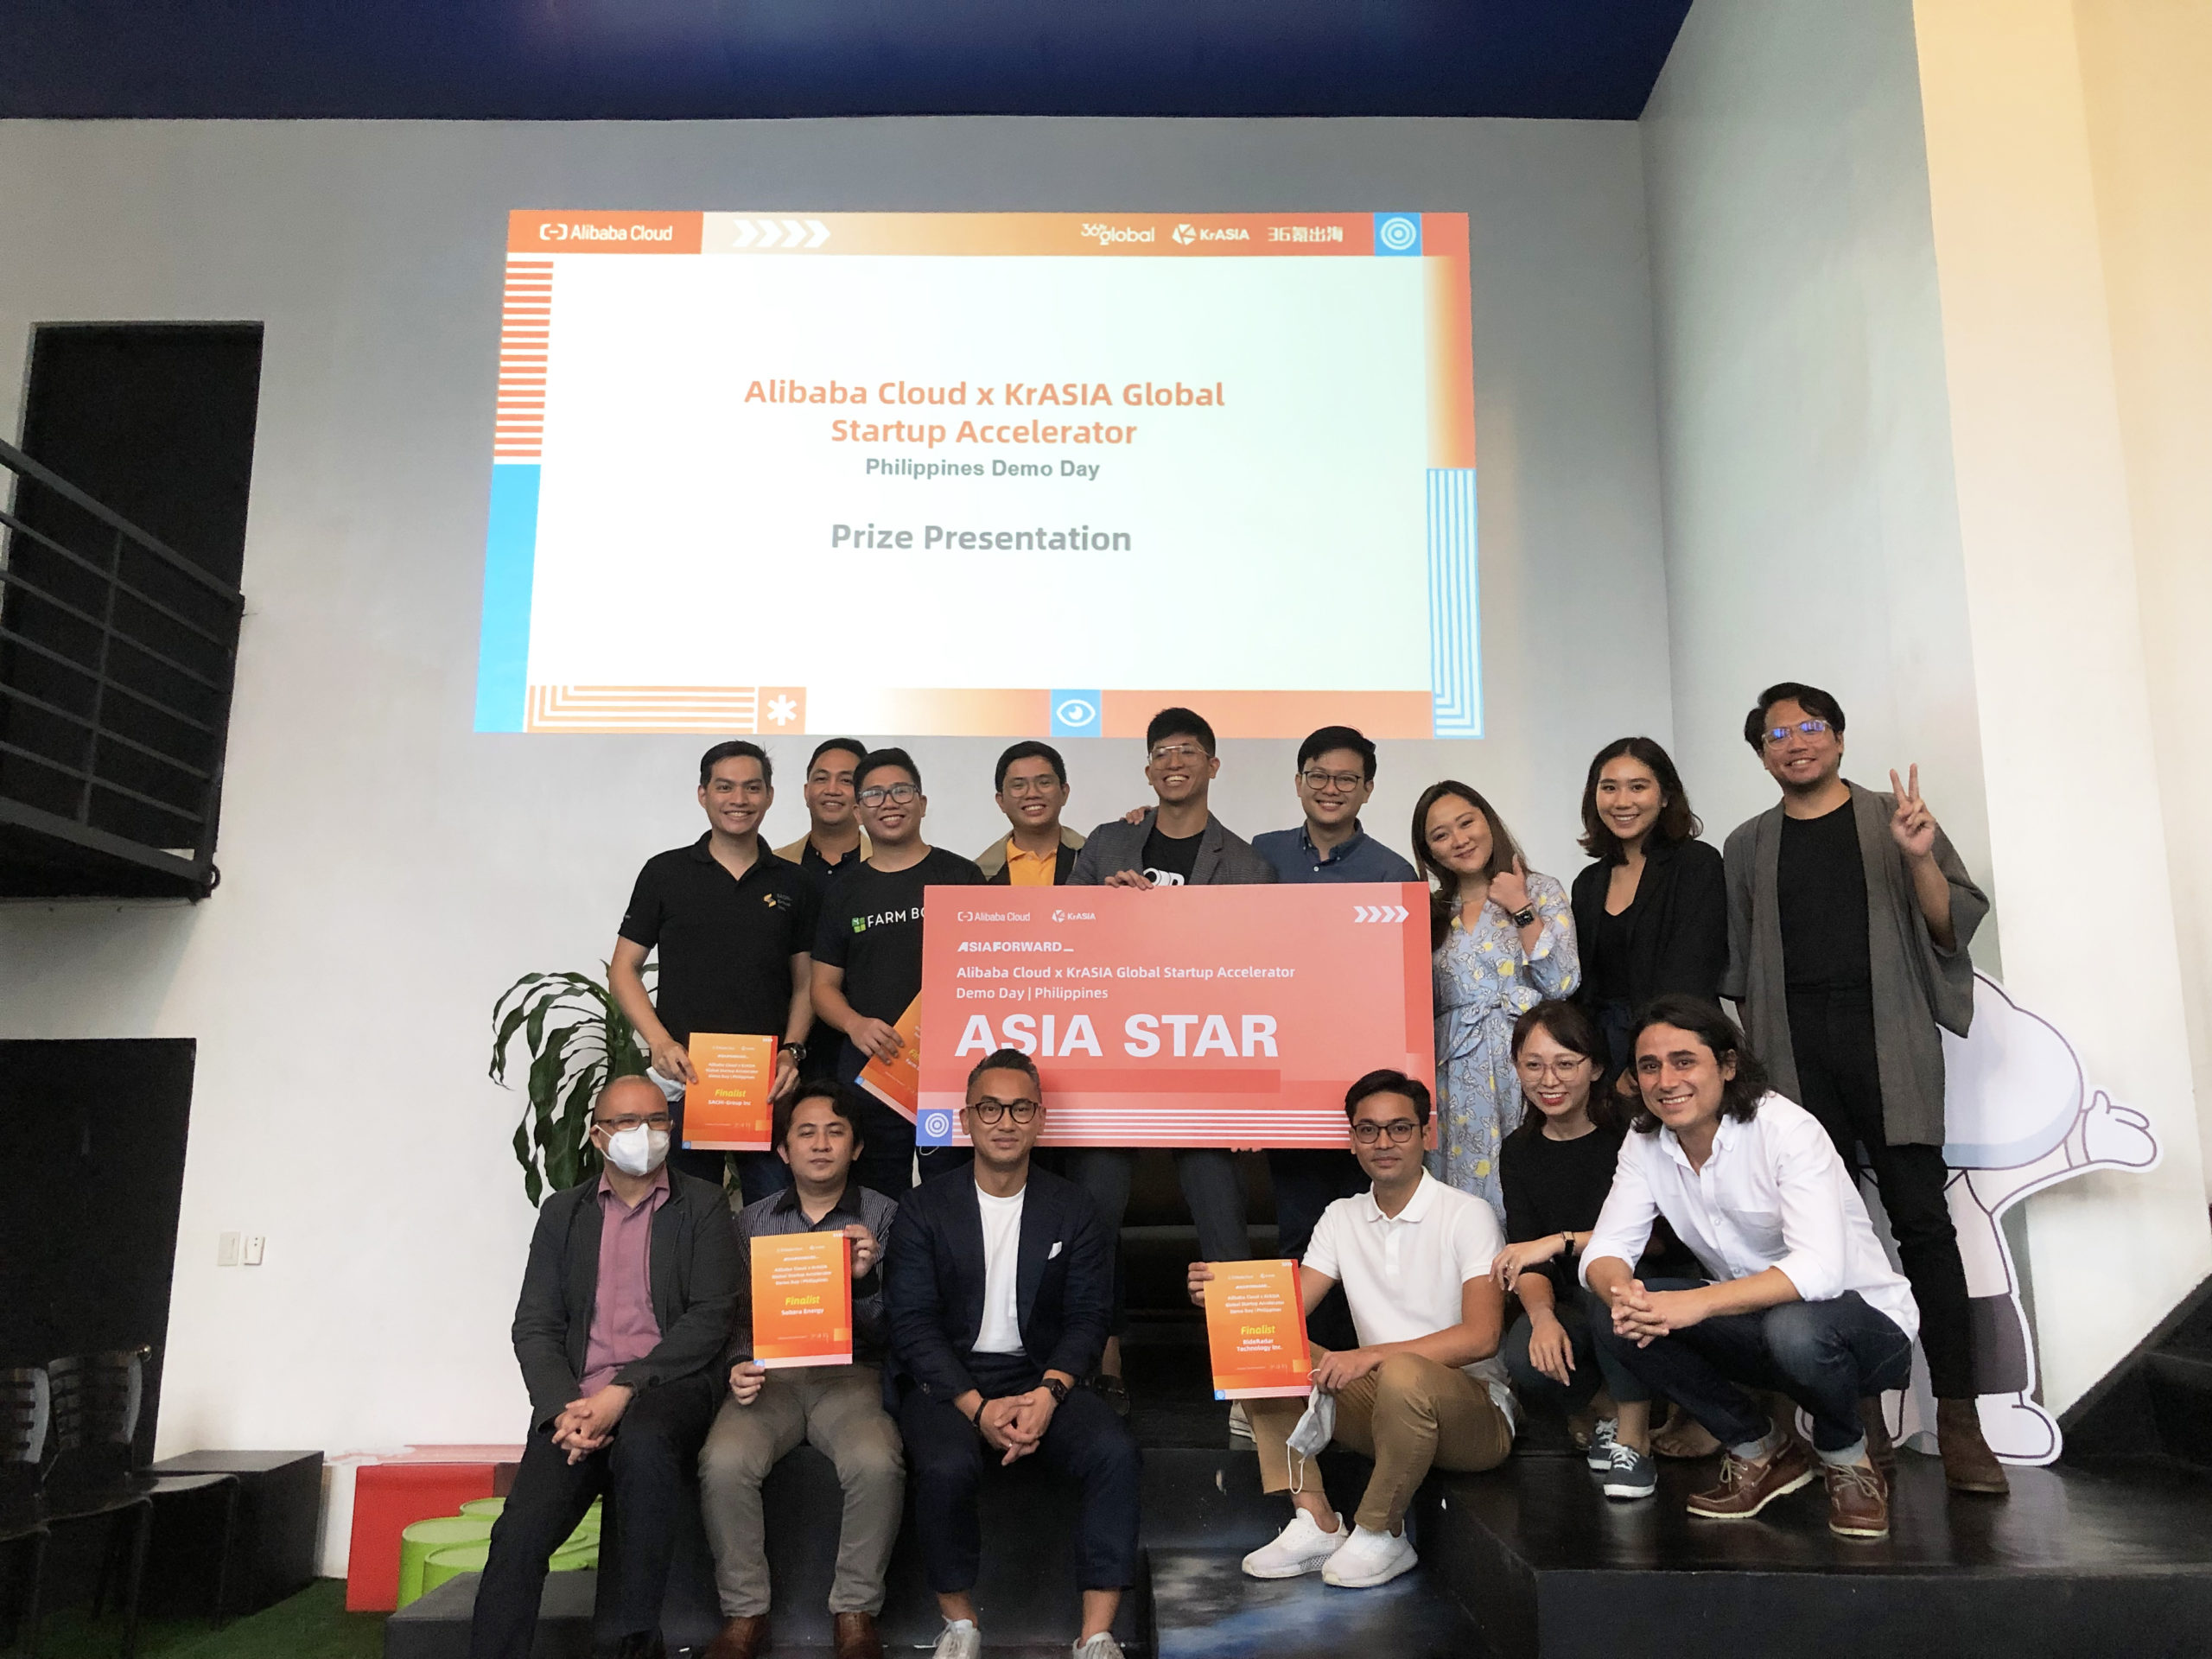 On Demand Deals named Asia Star of the Alibaba Cloud x KrASIA Global Startup Accelerator Philippines Demo Day